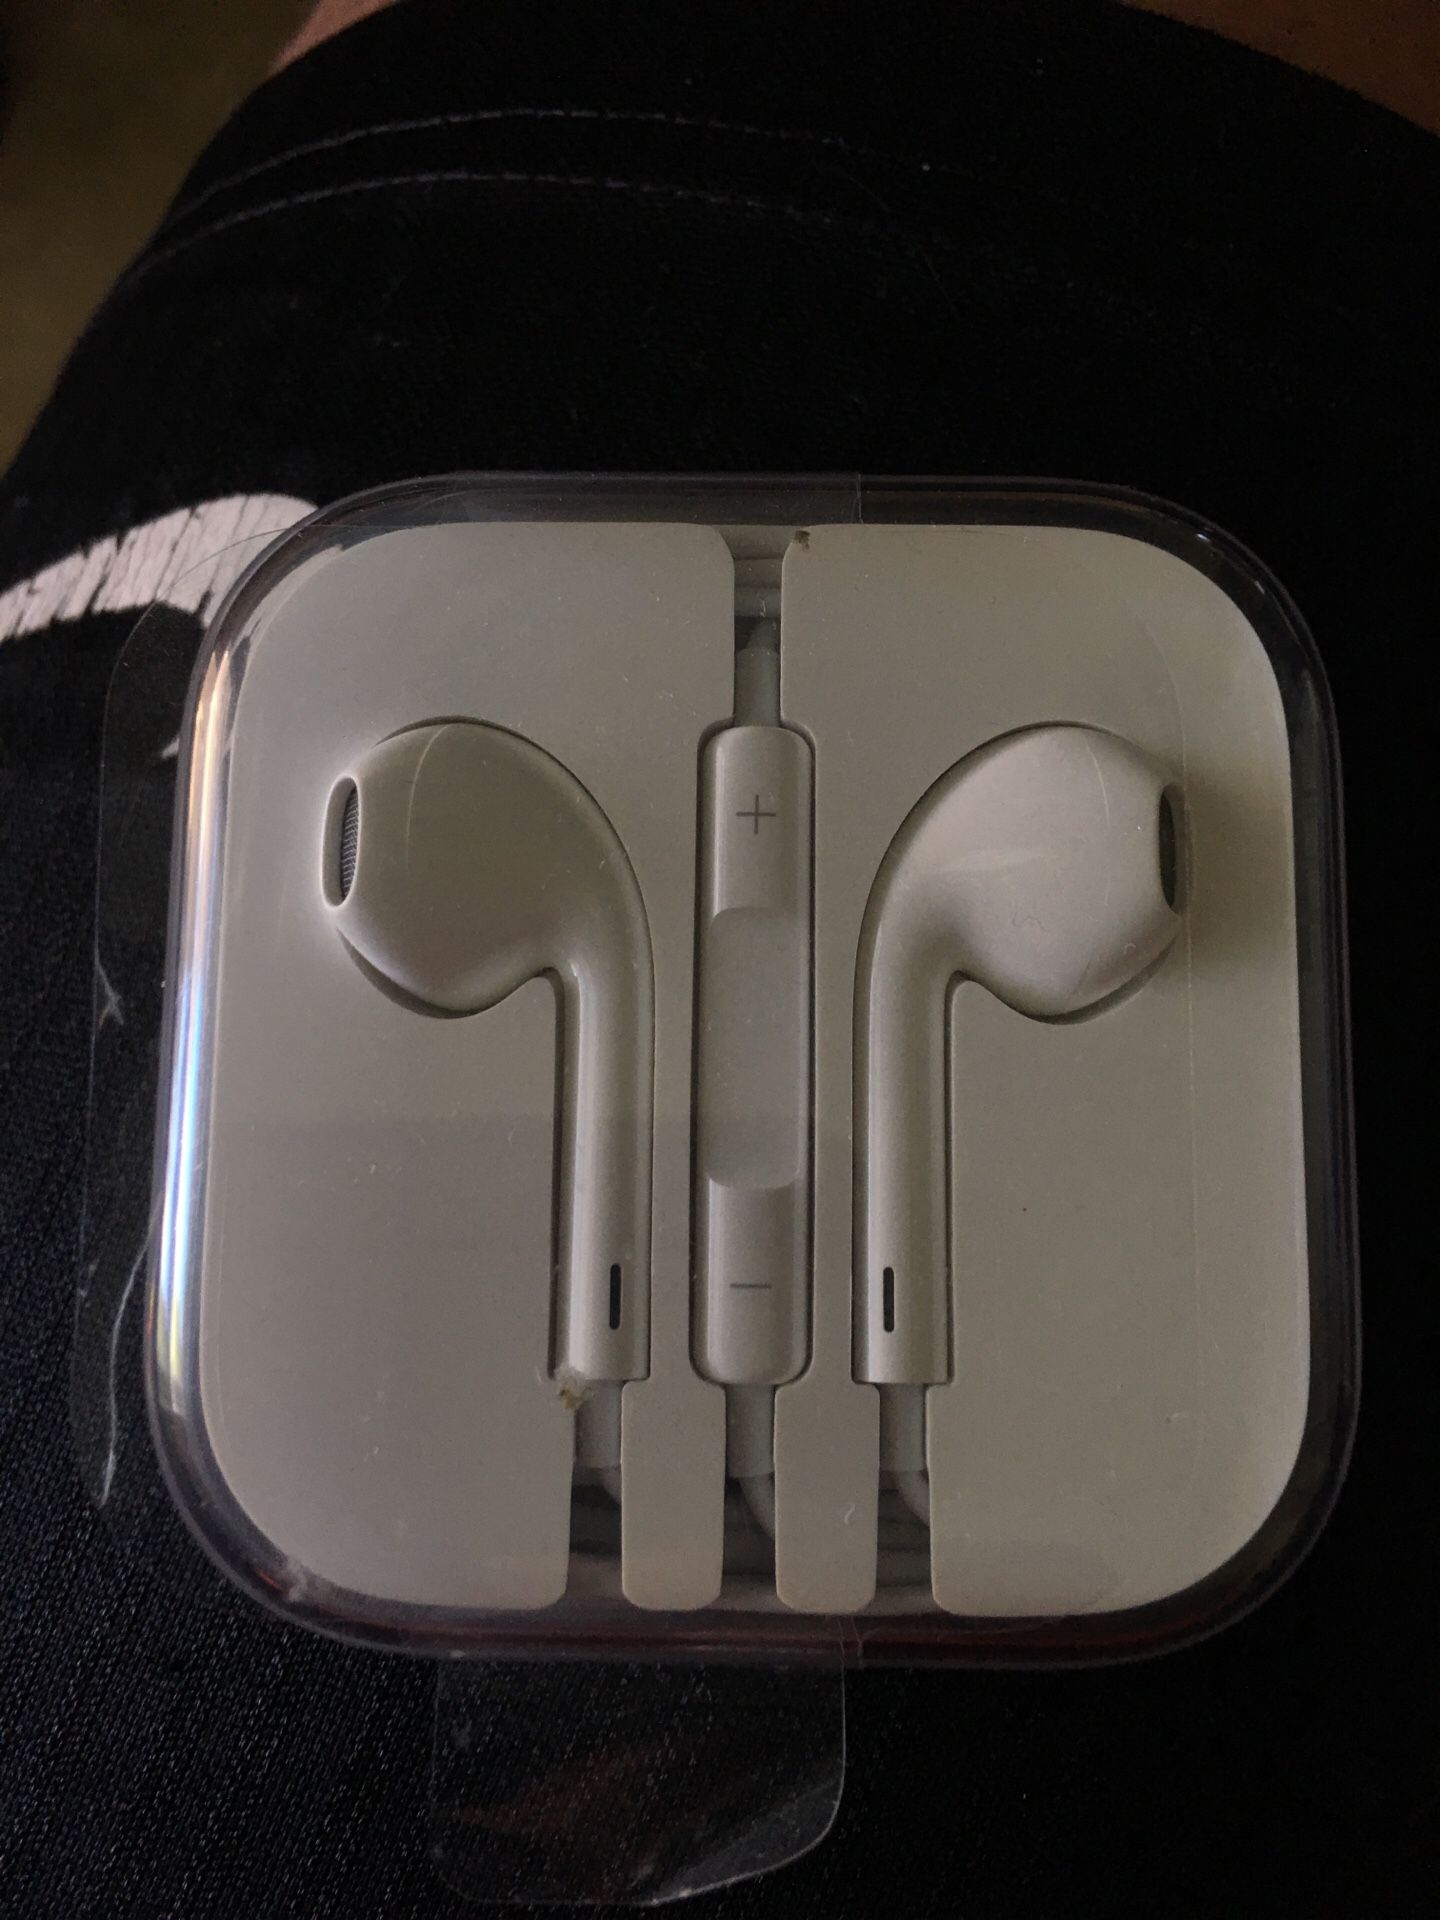 iPhone earbuds